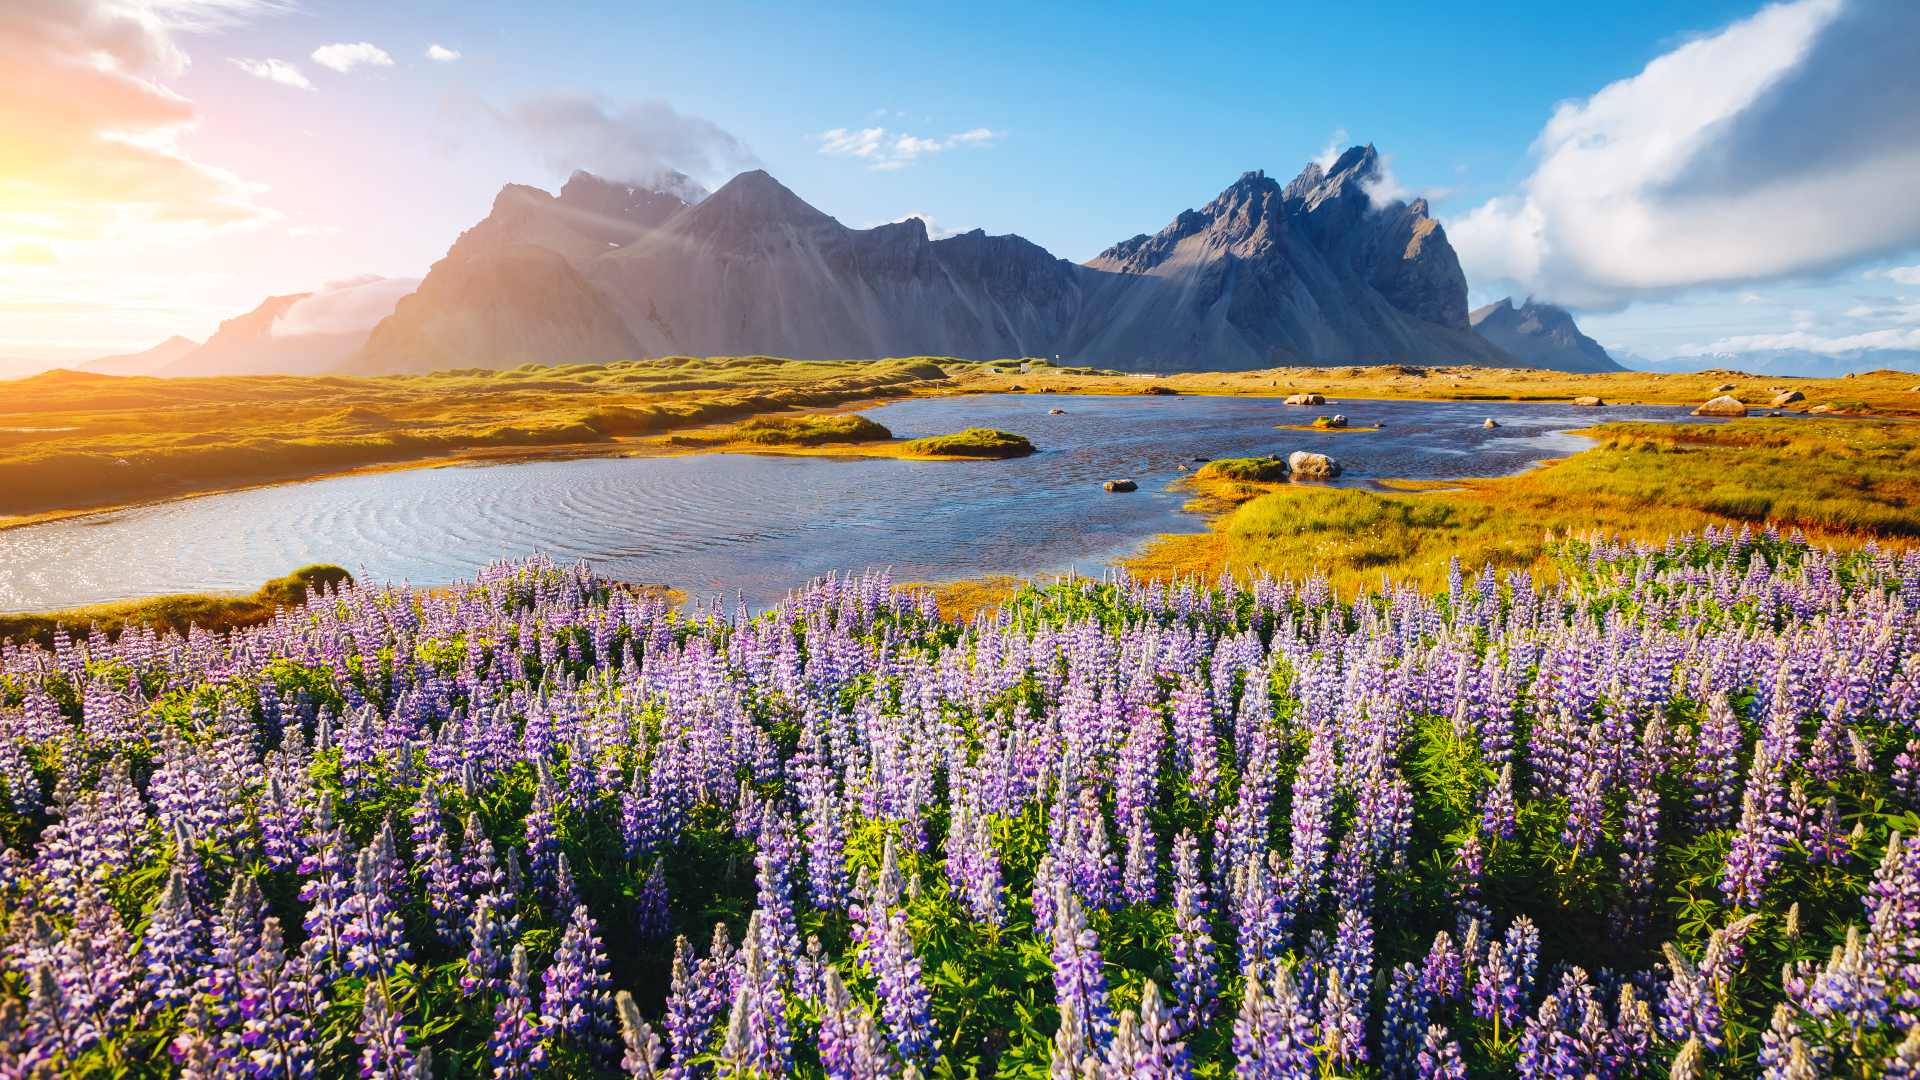 Vestrahorn mountain and blue lupine flowers in Iceland